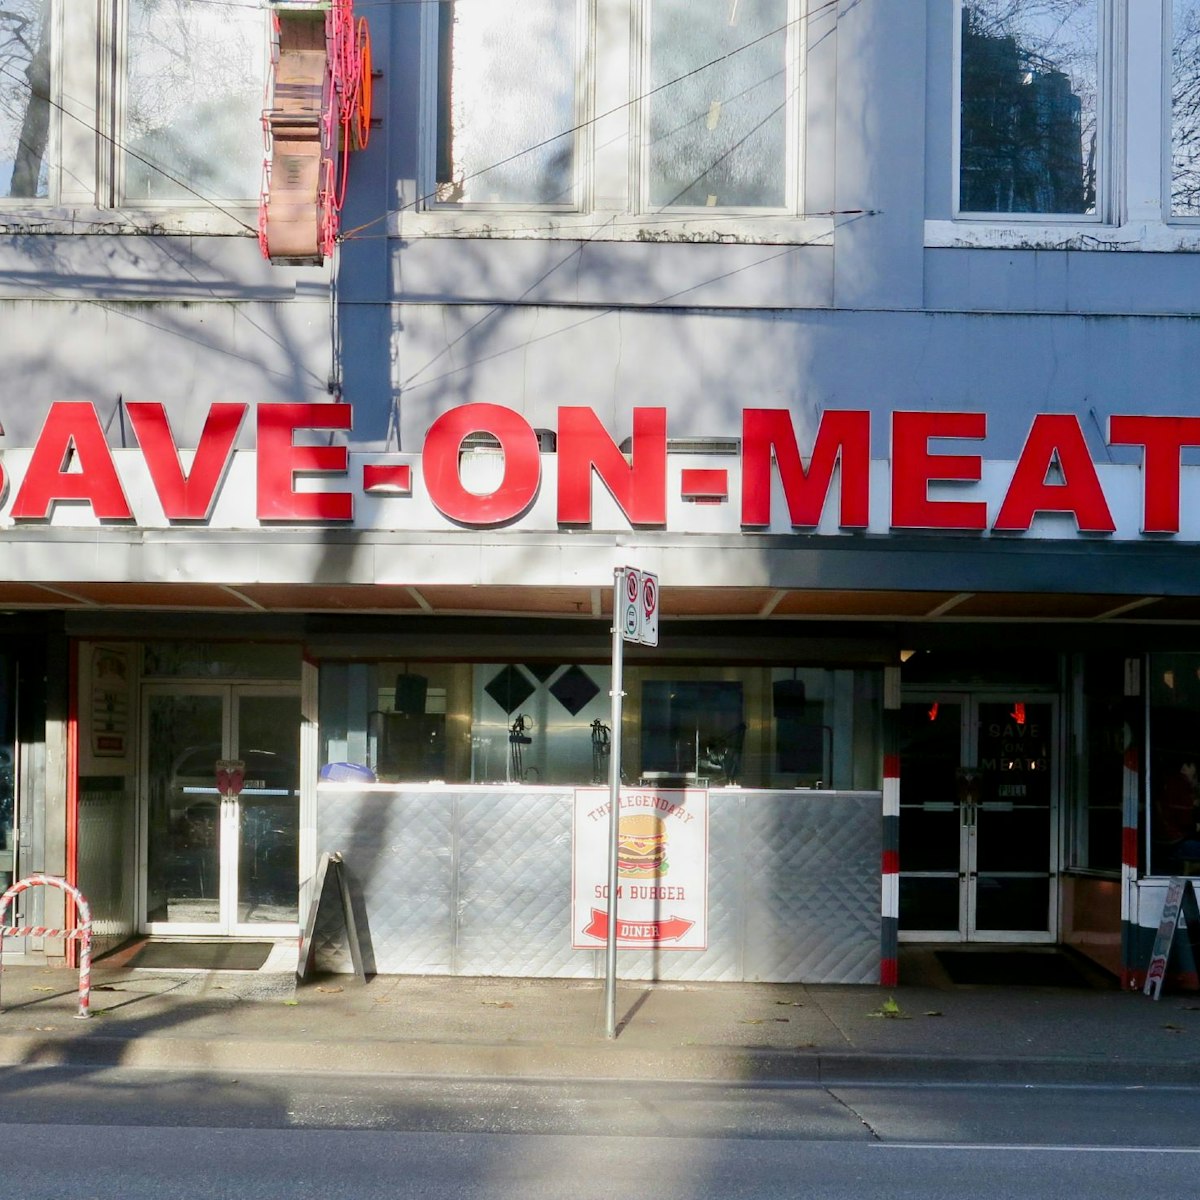 Save On Meats exterior